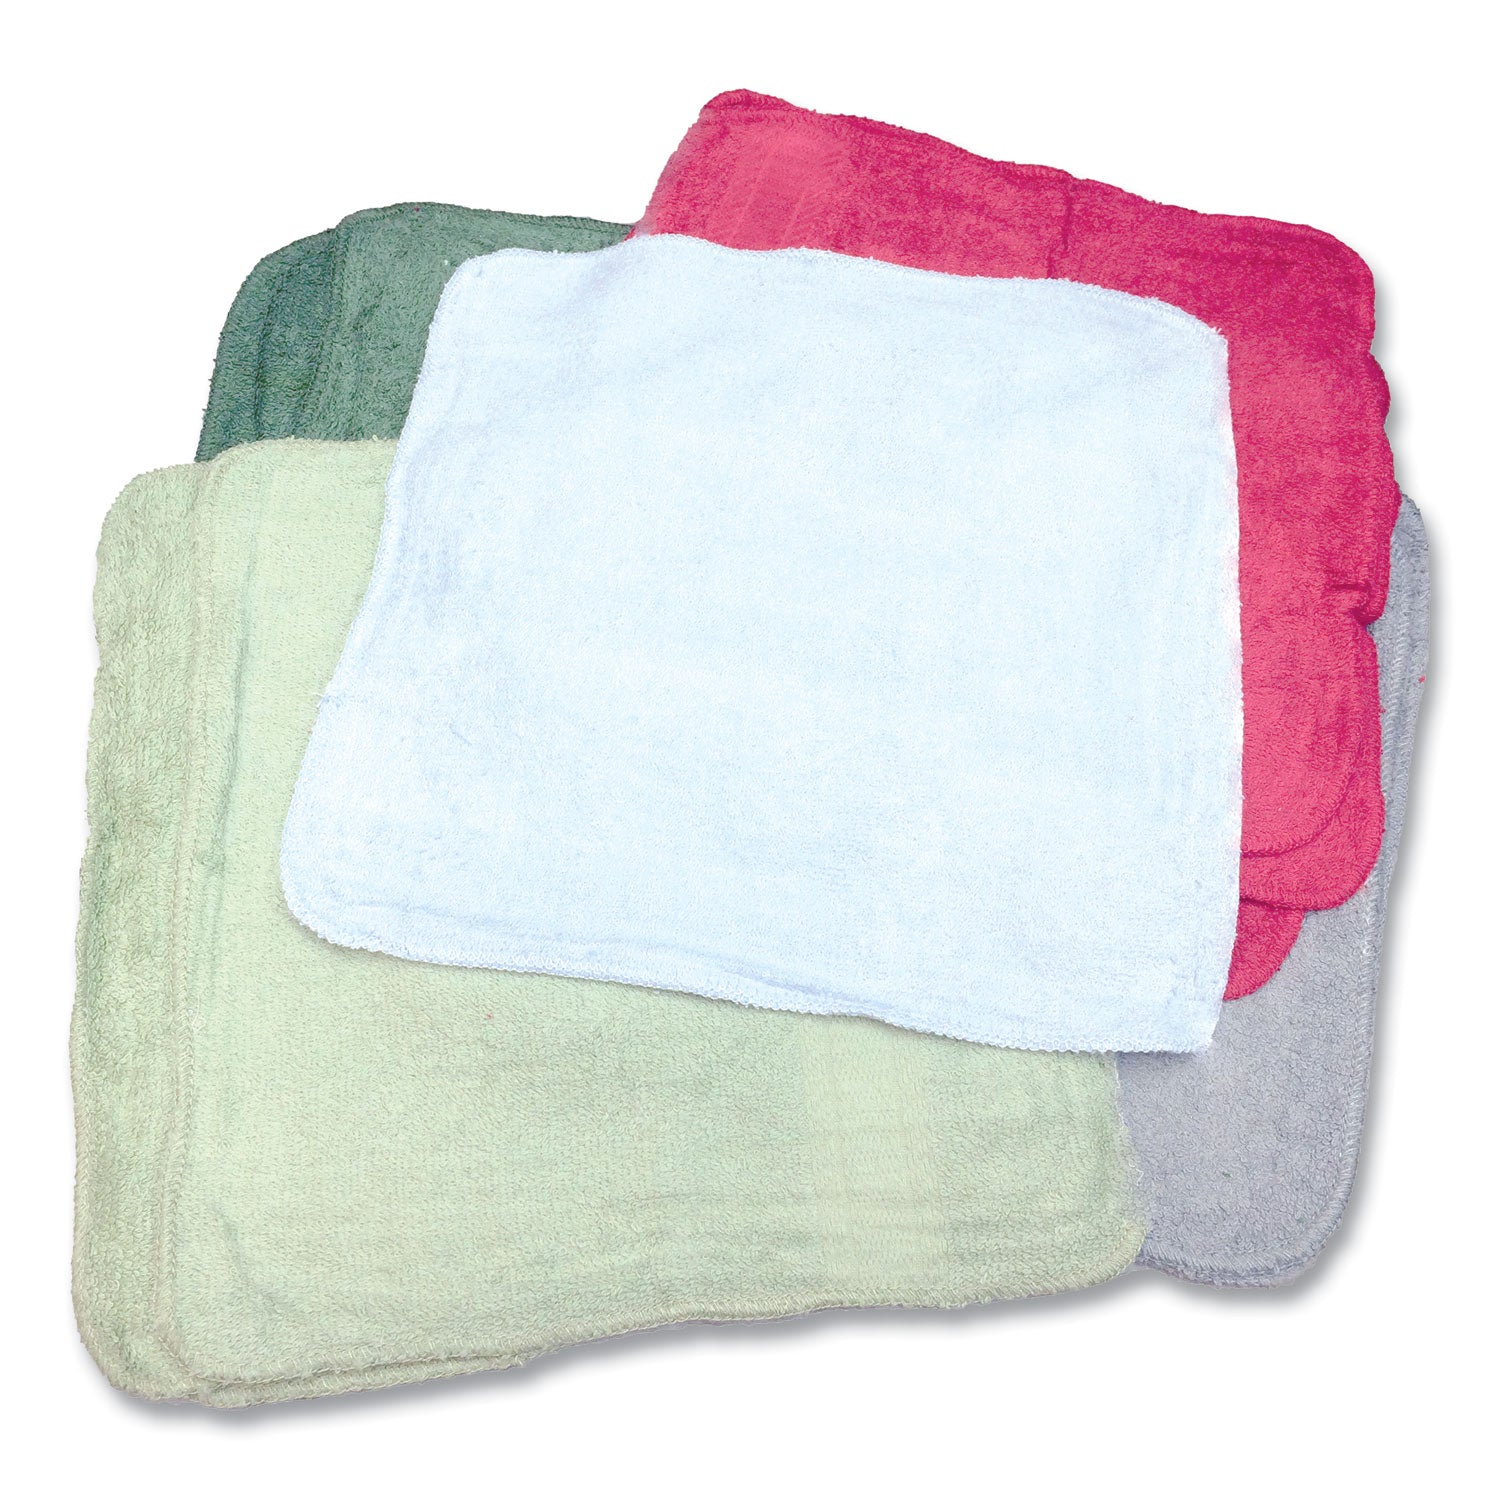 qwick-wick-terry-towels-12-x-12-assorted-colors-25-lb-bale-approximately-280-bale_mnhn030c1025 - 1